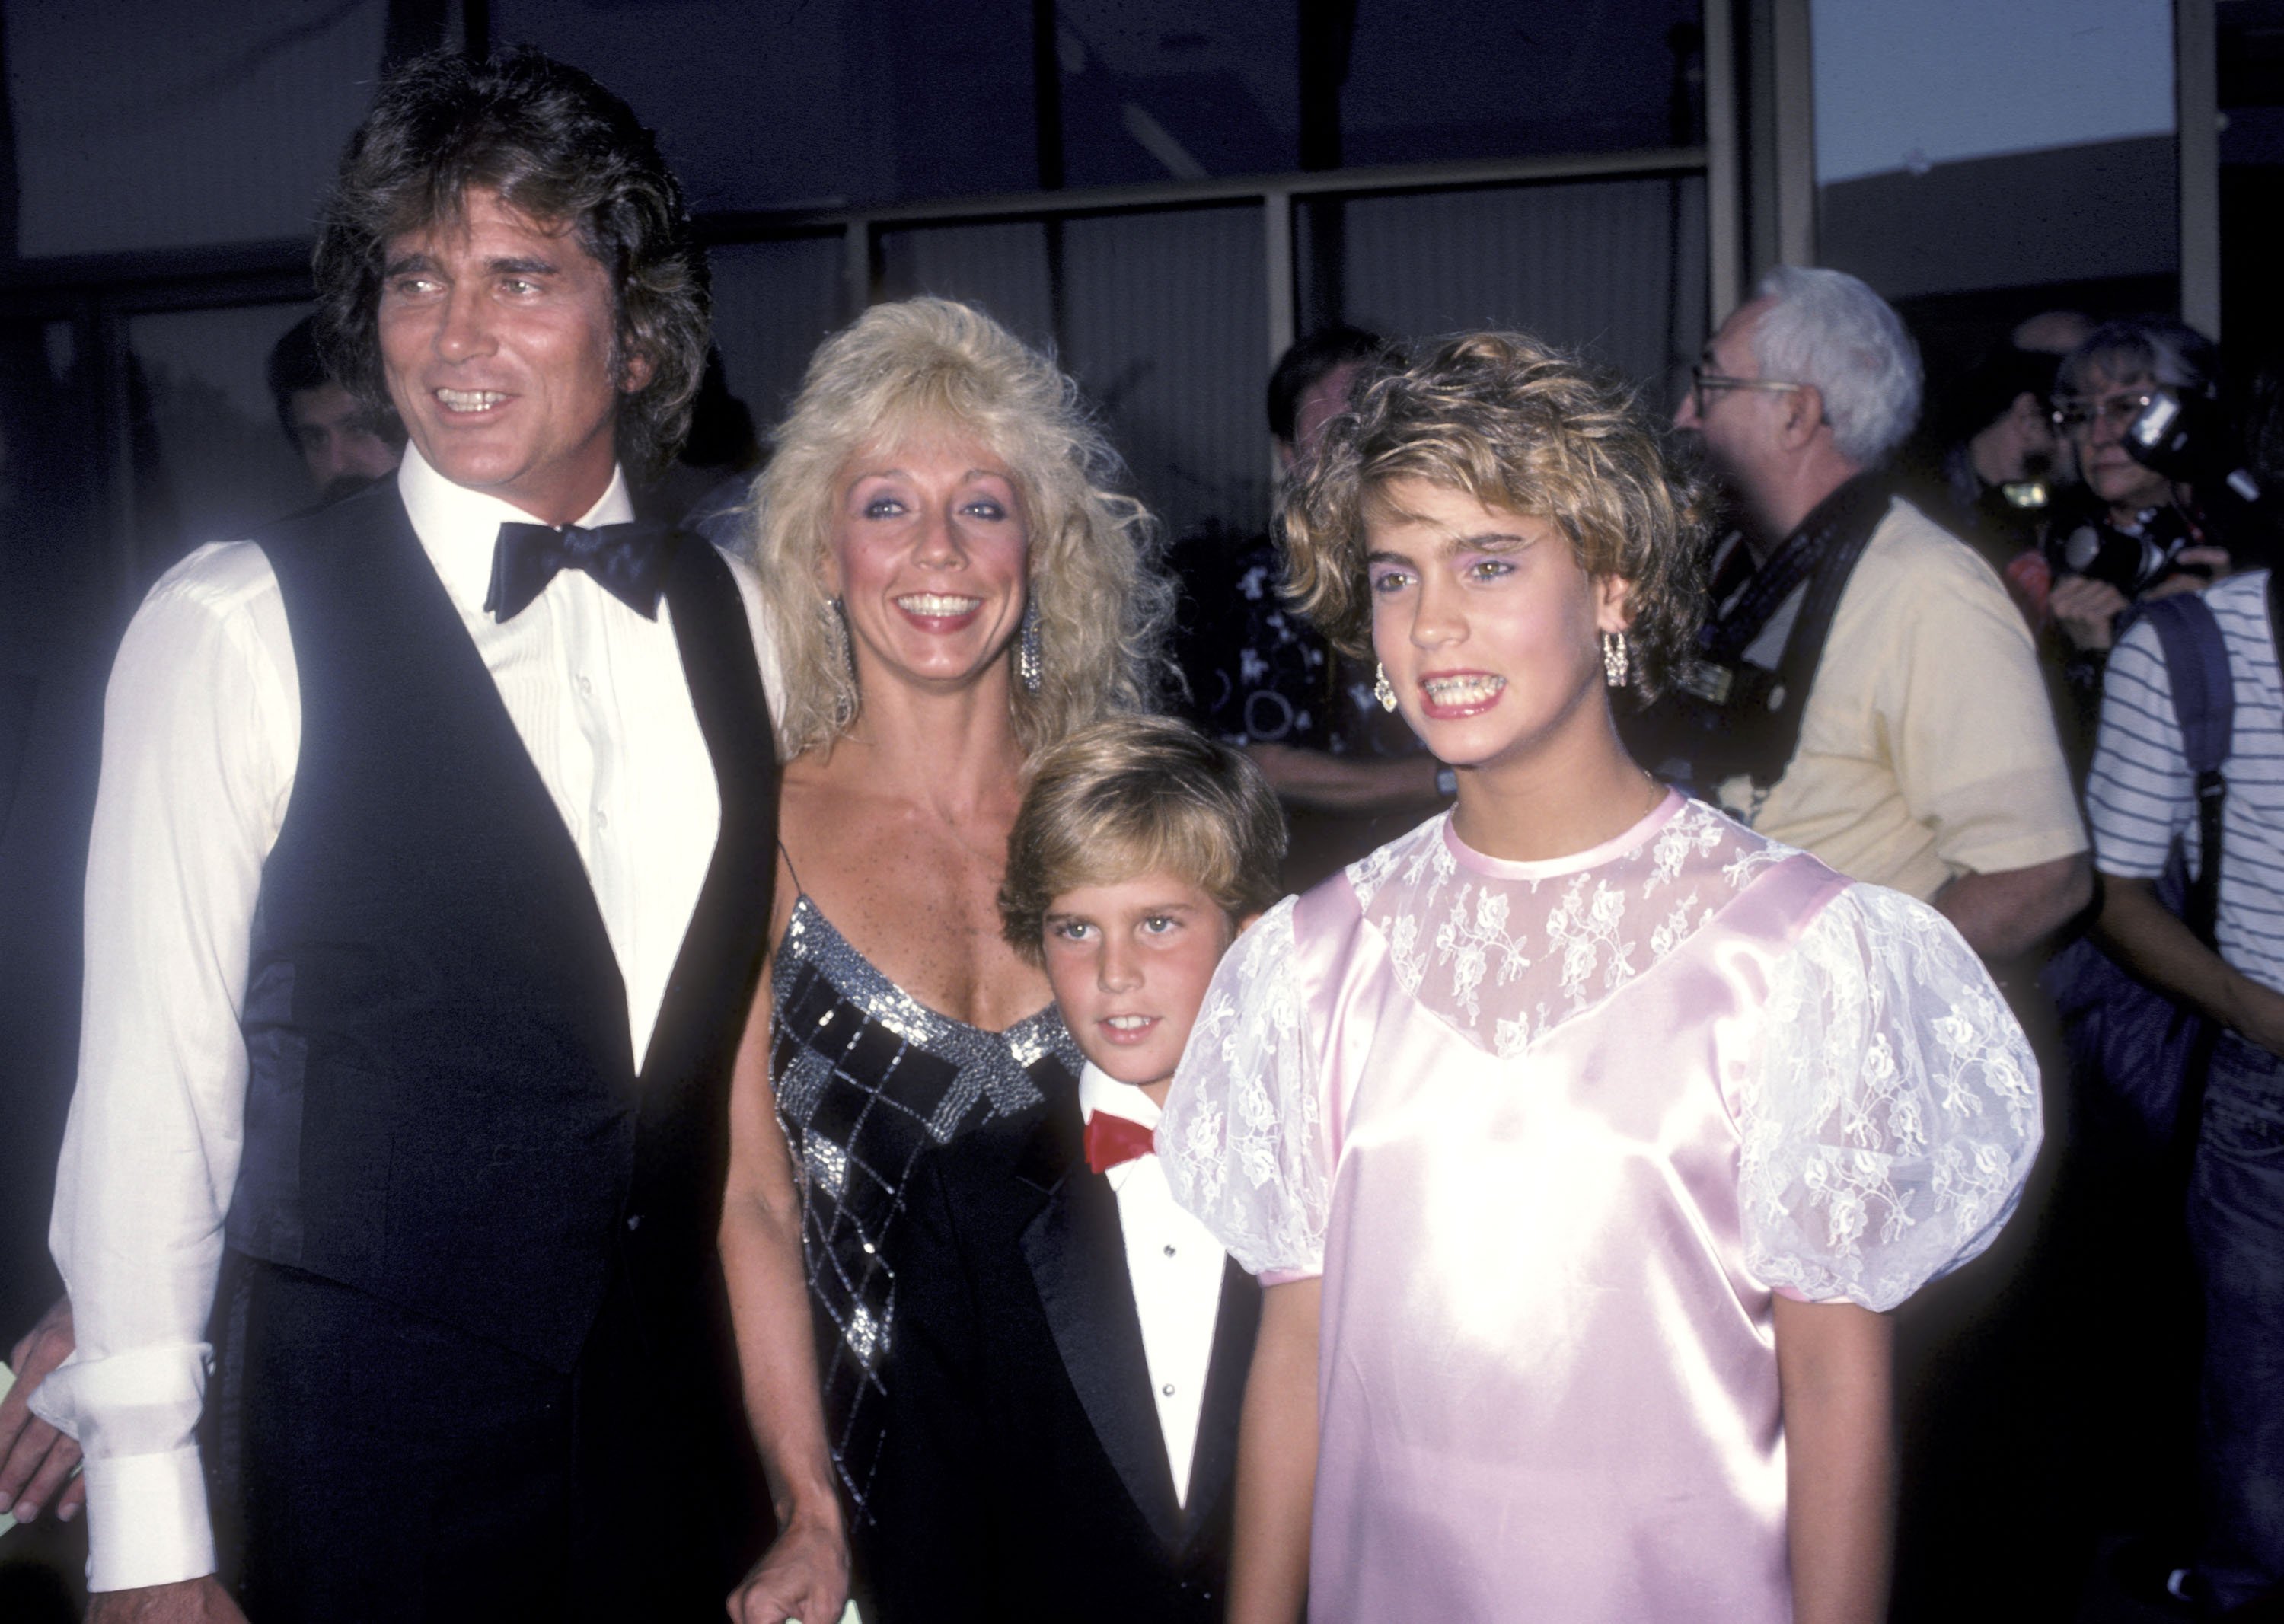 Michael Landon, wife Cindy Landon and his kids Christopher Landon and Shawna Landon attend the "Sam's Son" Beverly Hills Premiere on August 15, 1984  | Photo: GettyImages